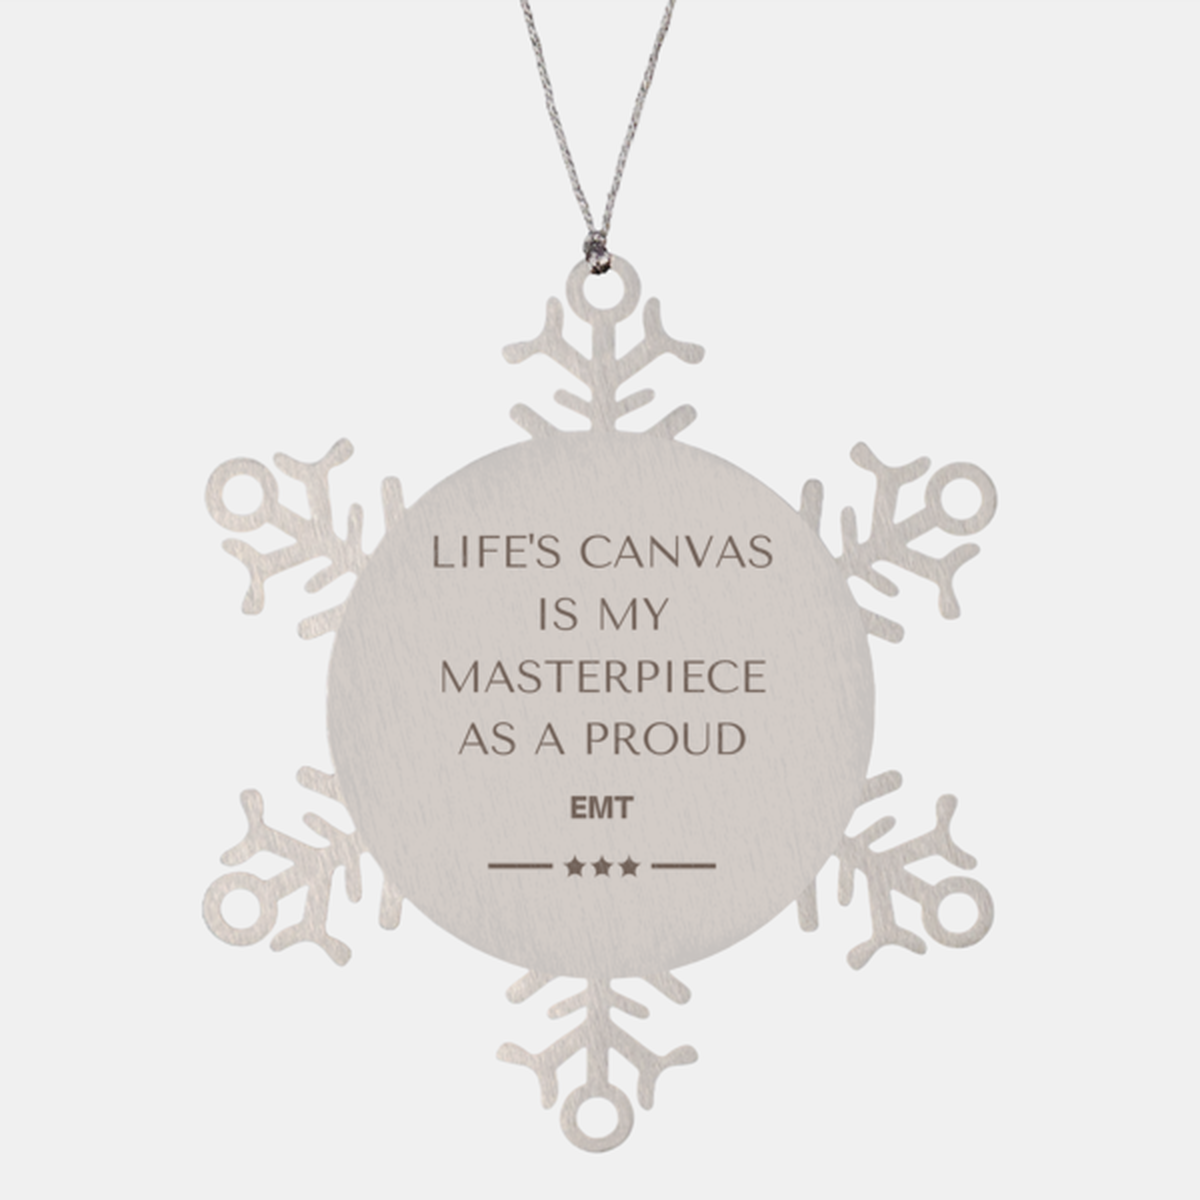 Proud EMT Gifts, Life's canvas is my masterpiece, Epic Birthday Christmas Unique Snowflake Ornament For EMT, Coworkers, Men, Women, Friends